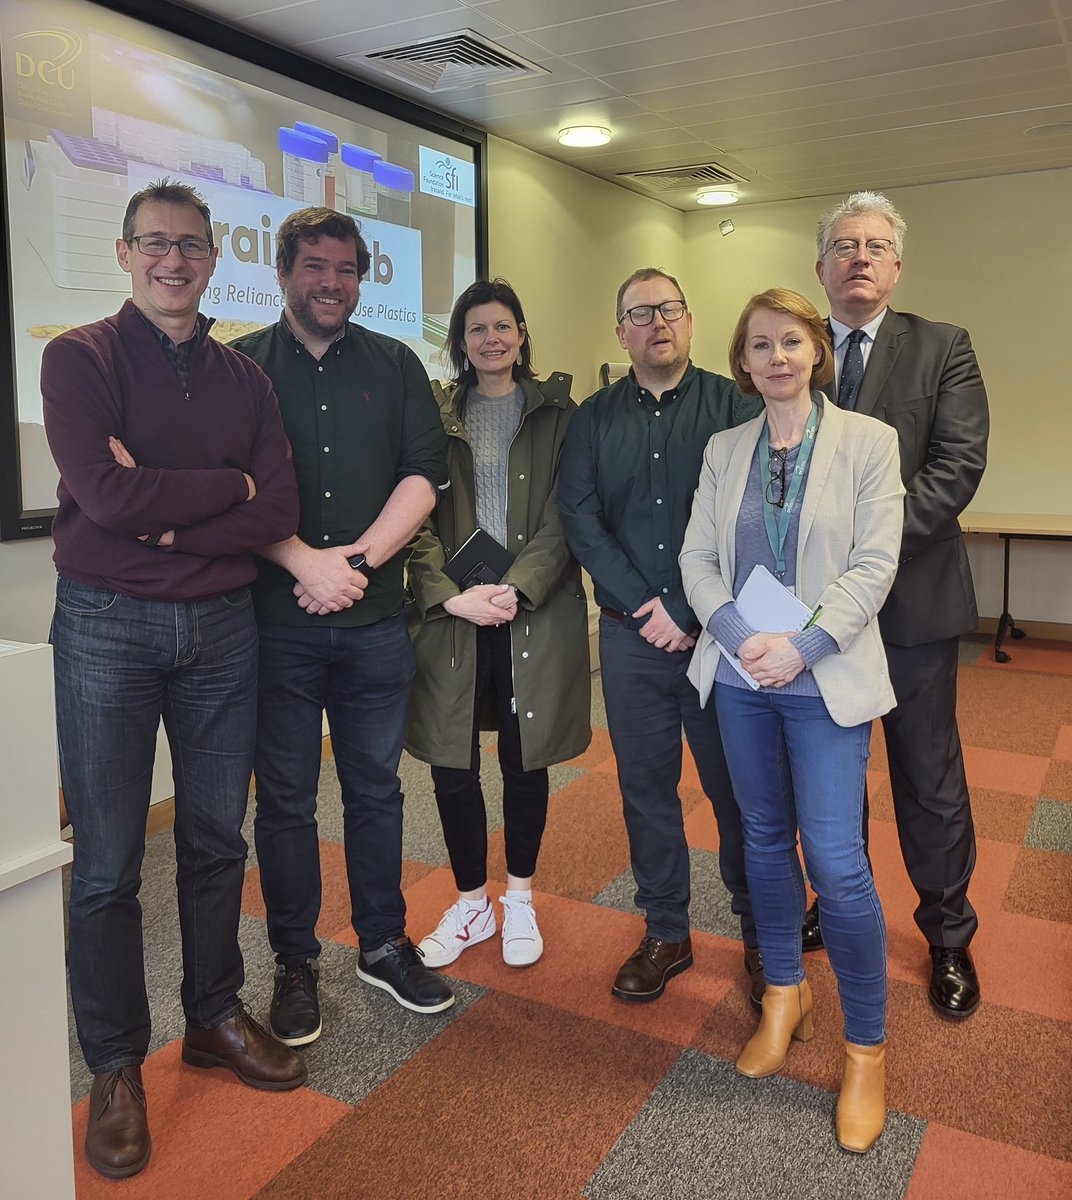 Great to have the @grain_lab team showcase their @scienceirel funded research at the “Transforming Challenges into Impact” seminar series, which is hosted by DCU Life Sciences Institute, @DCUBiodesign and @DcuBiotech. Truly disruptive technology being developed @DCU.